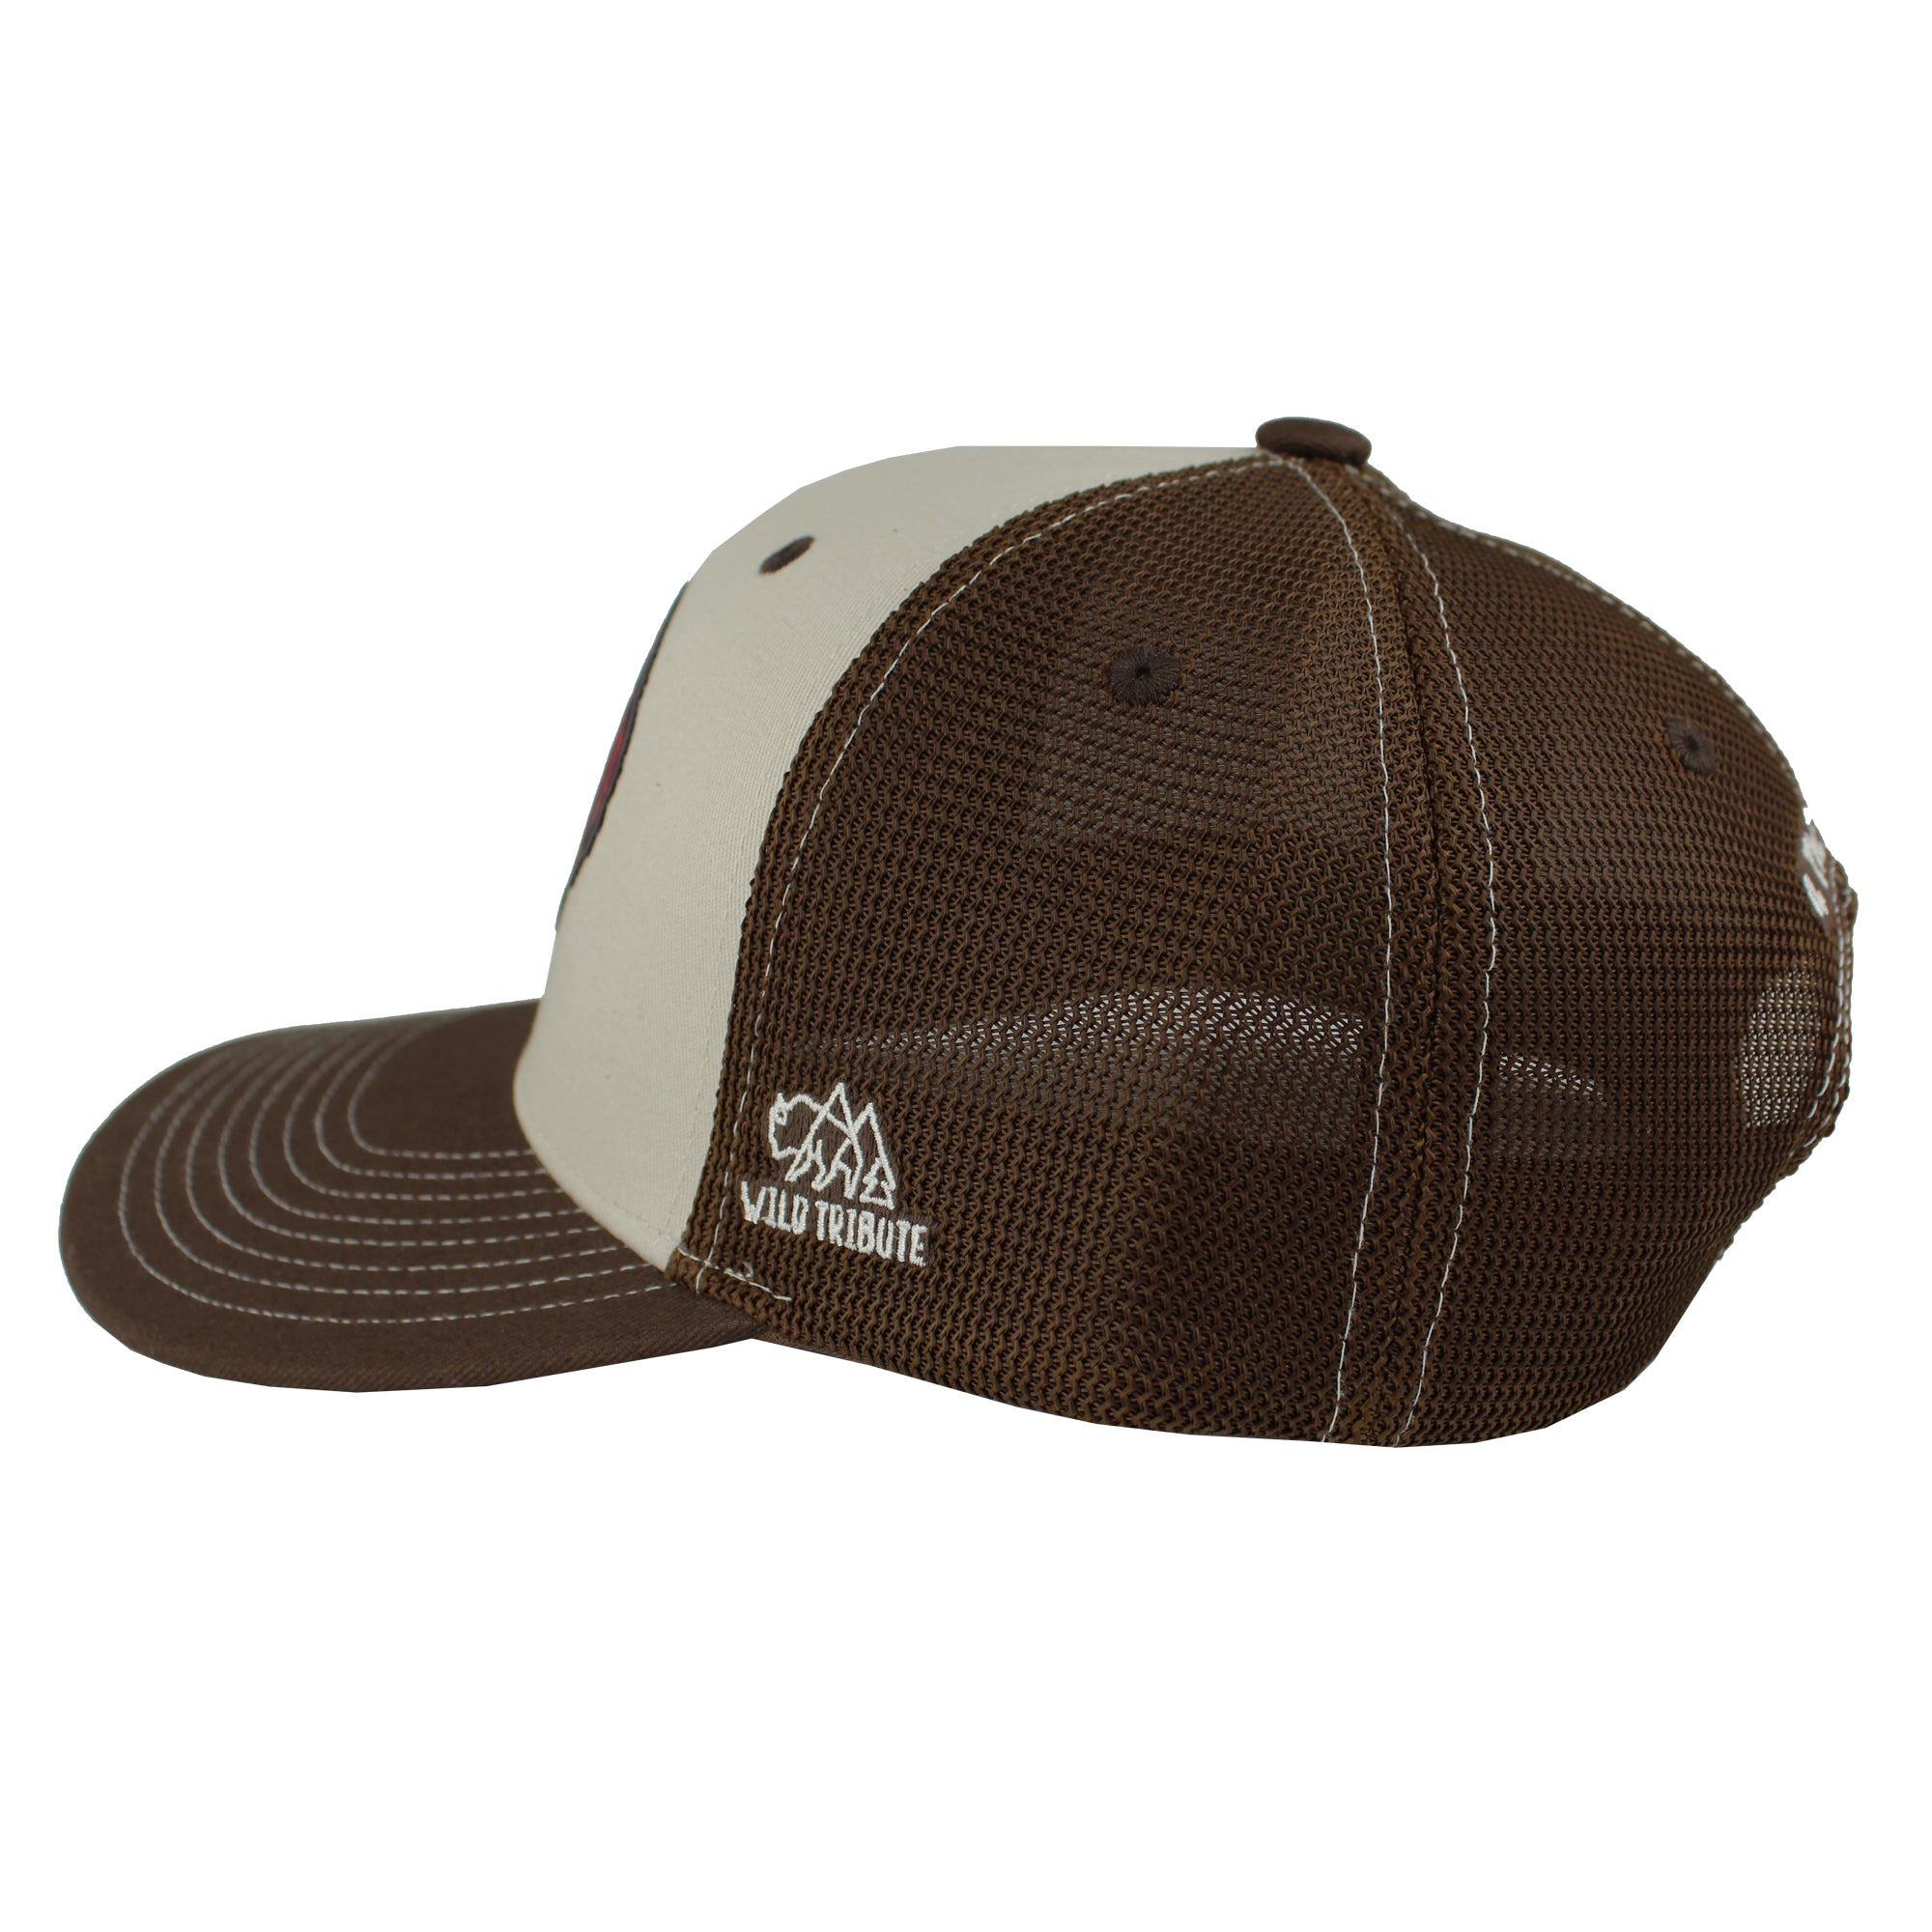 River Wyld - Trucker Hats, Clothing Store, Hats